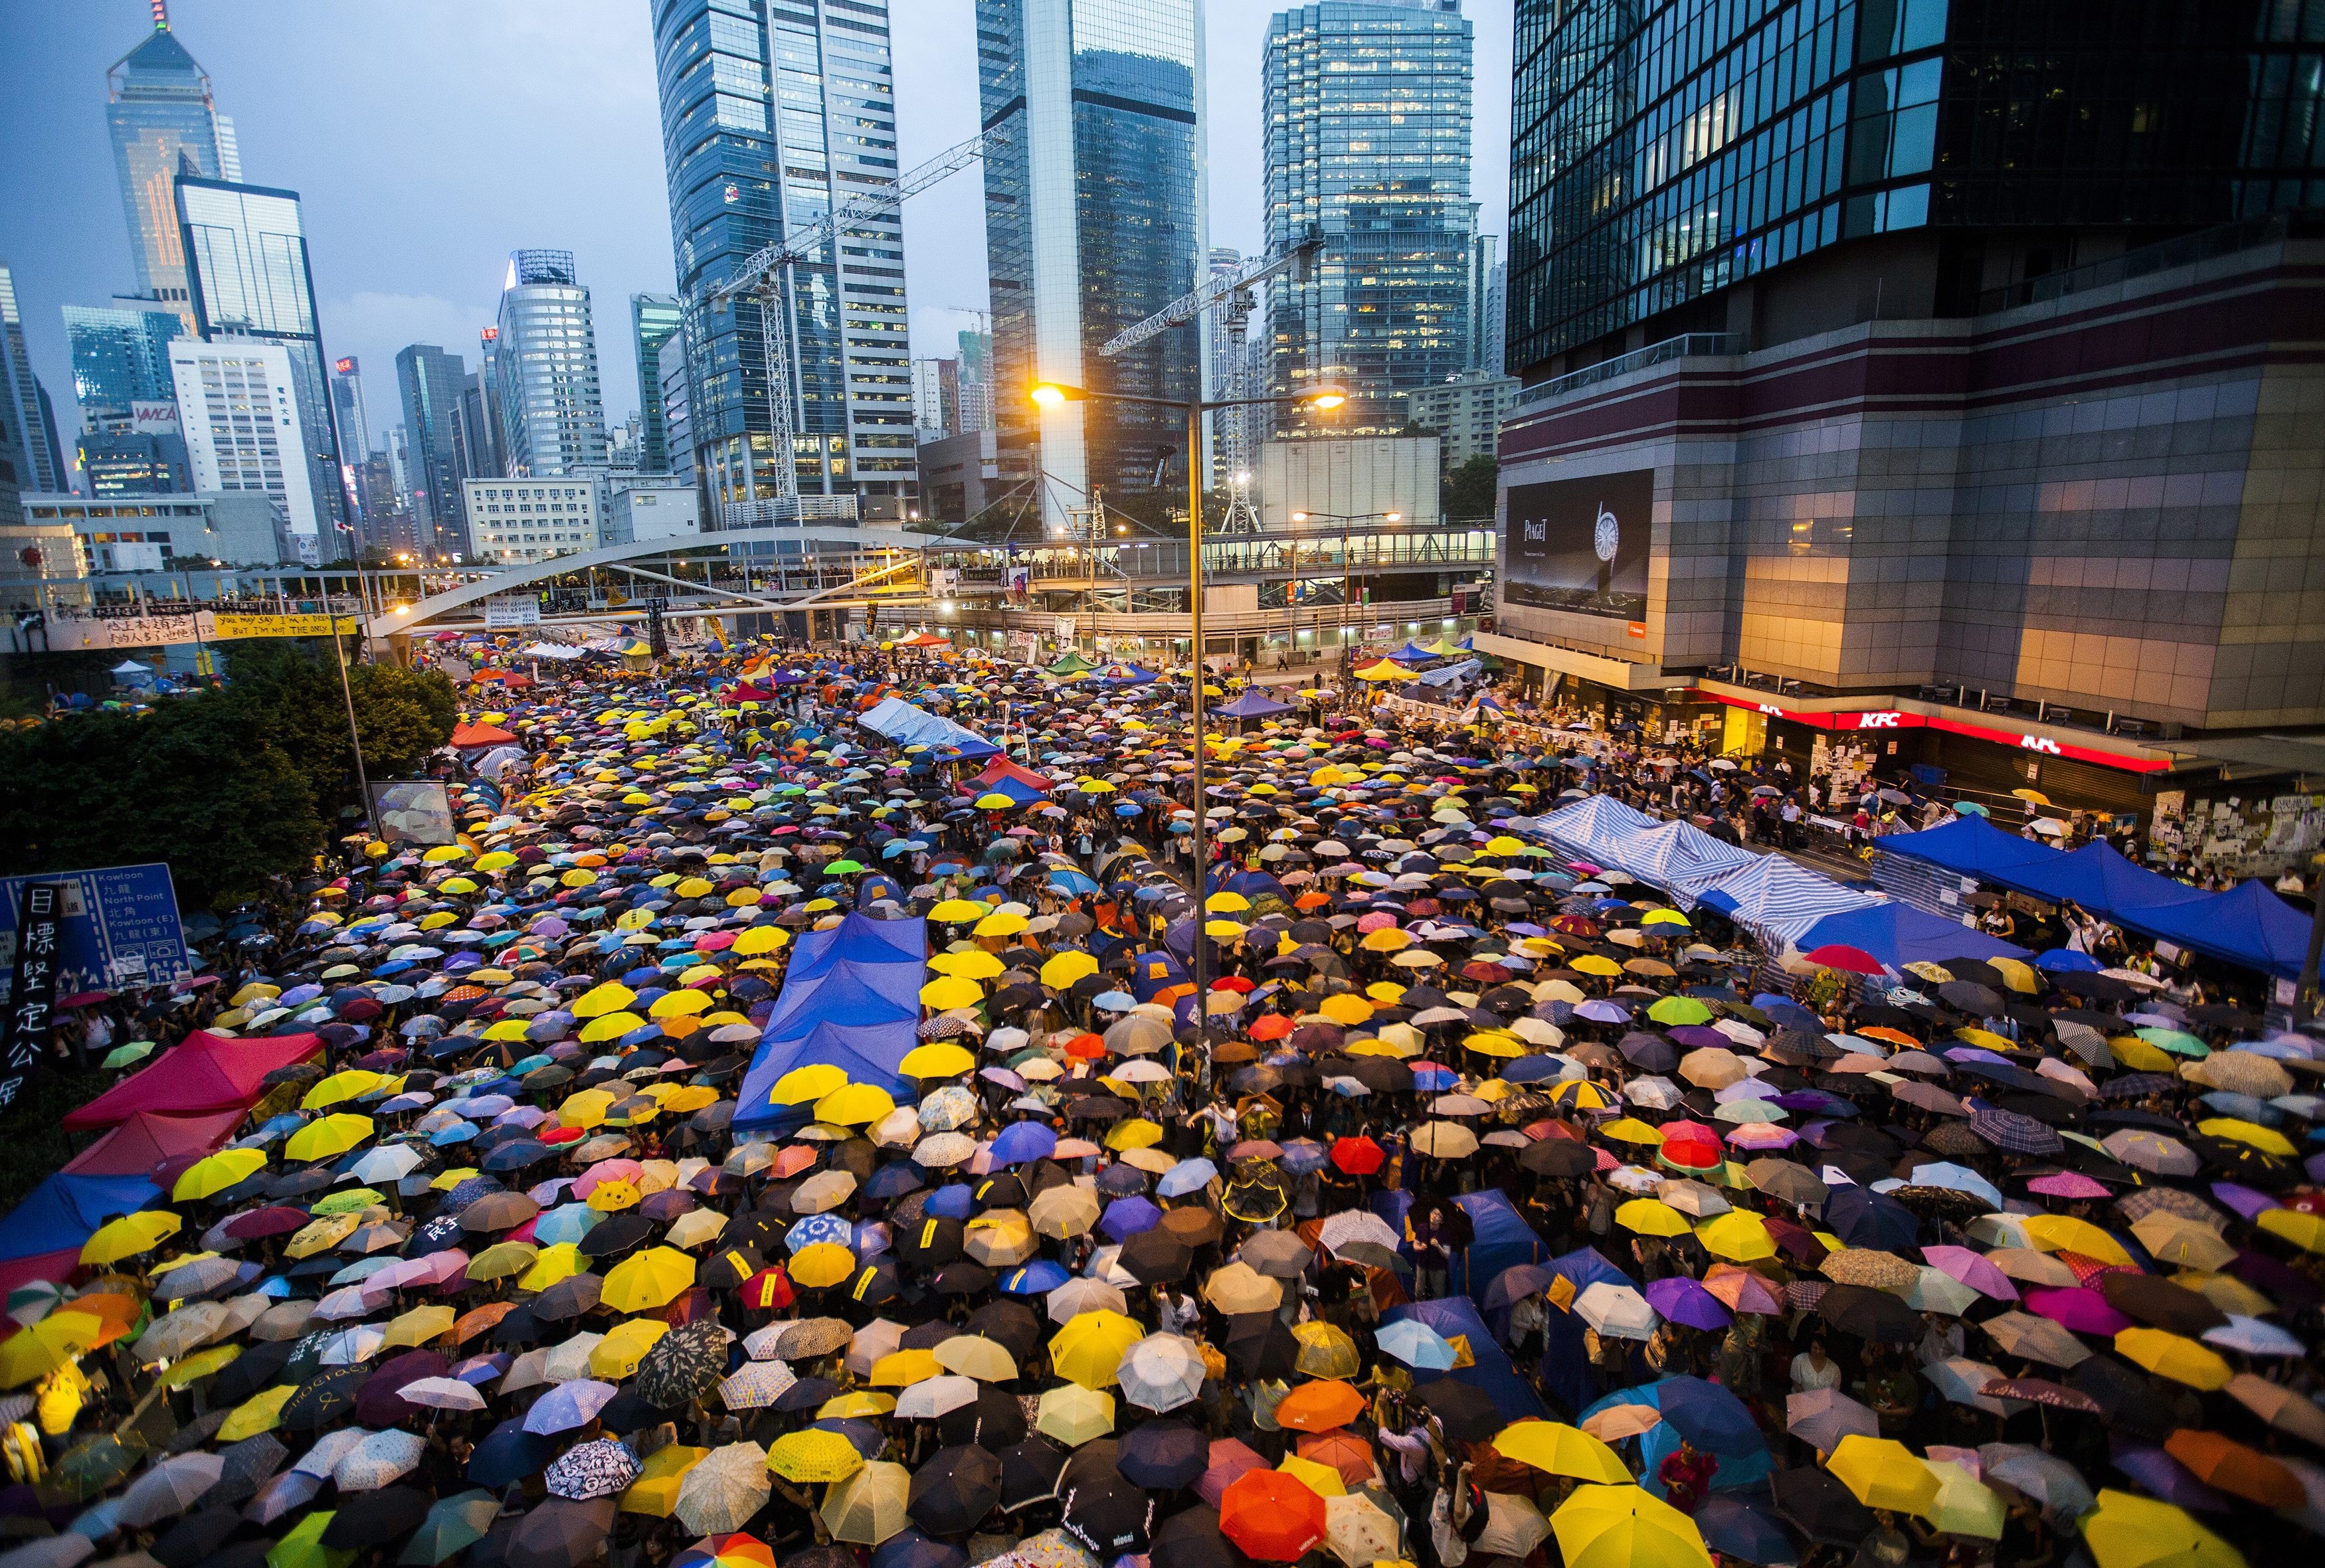 Protesters gathered in Admiralty in 2014 as part of the “umbrella movement”. Photo: European Pressphoto Agency